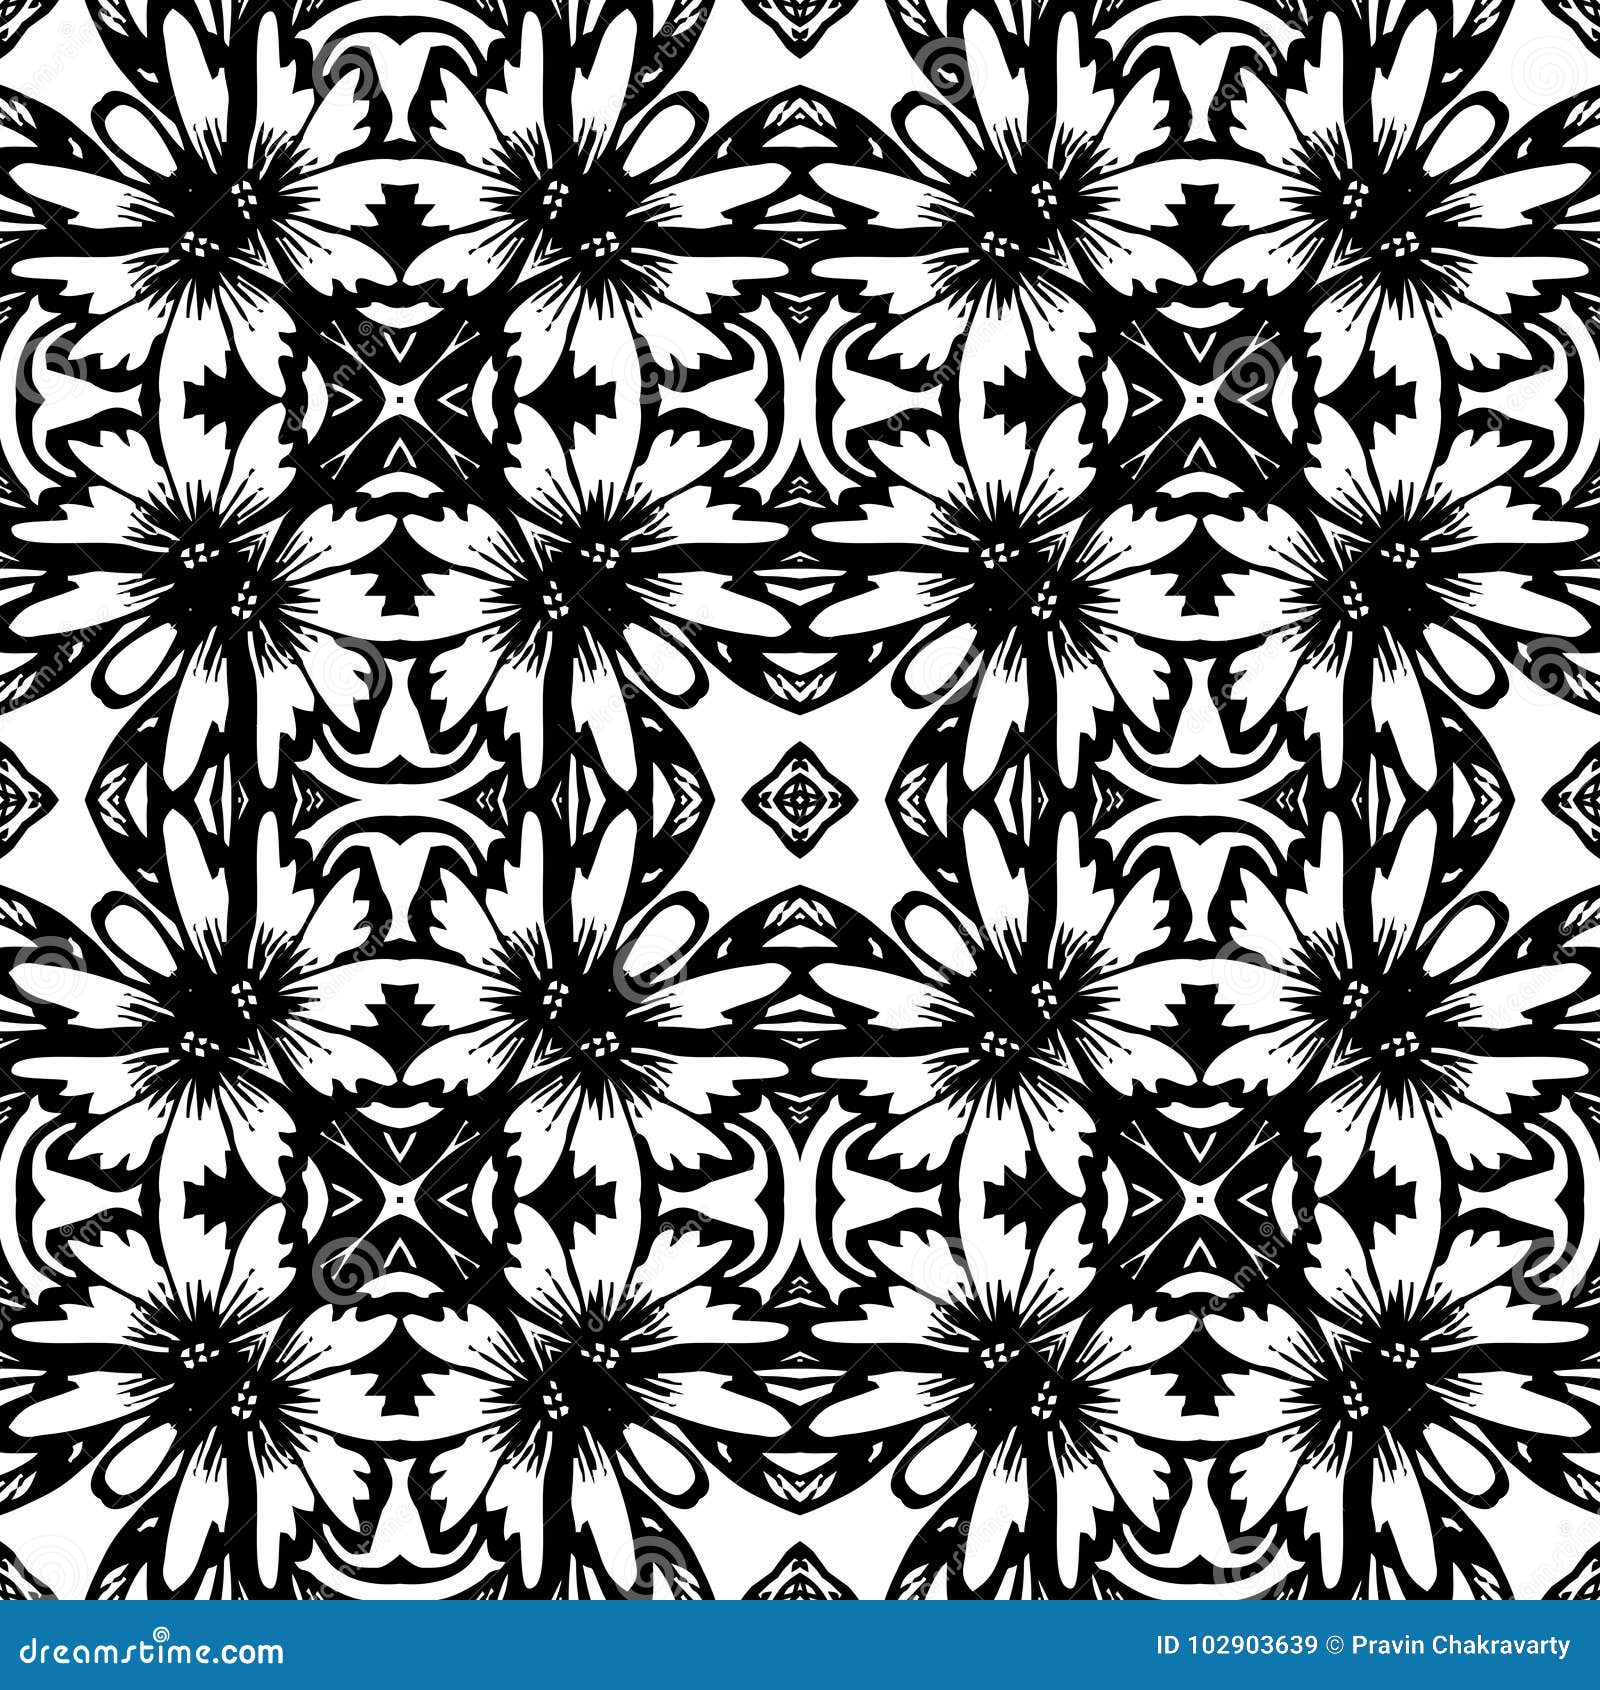  vintage seamless black and white floral pattern.